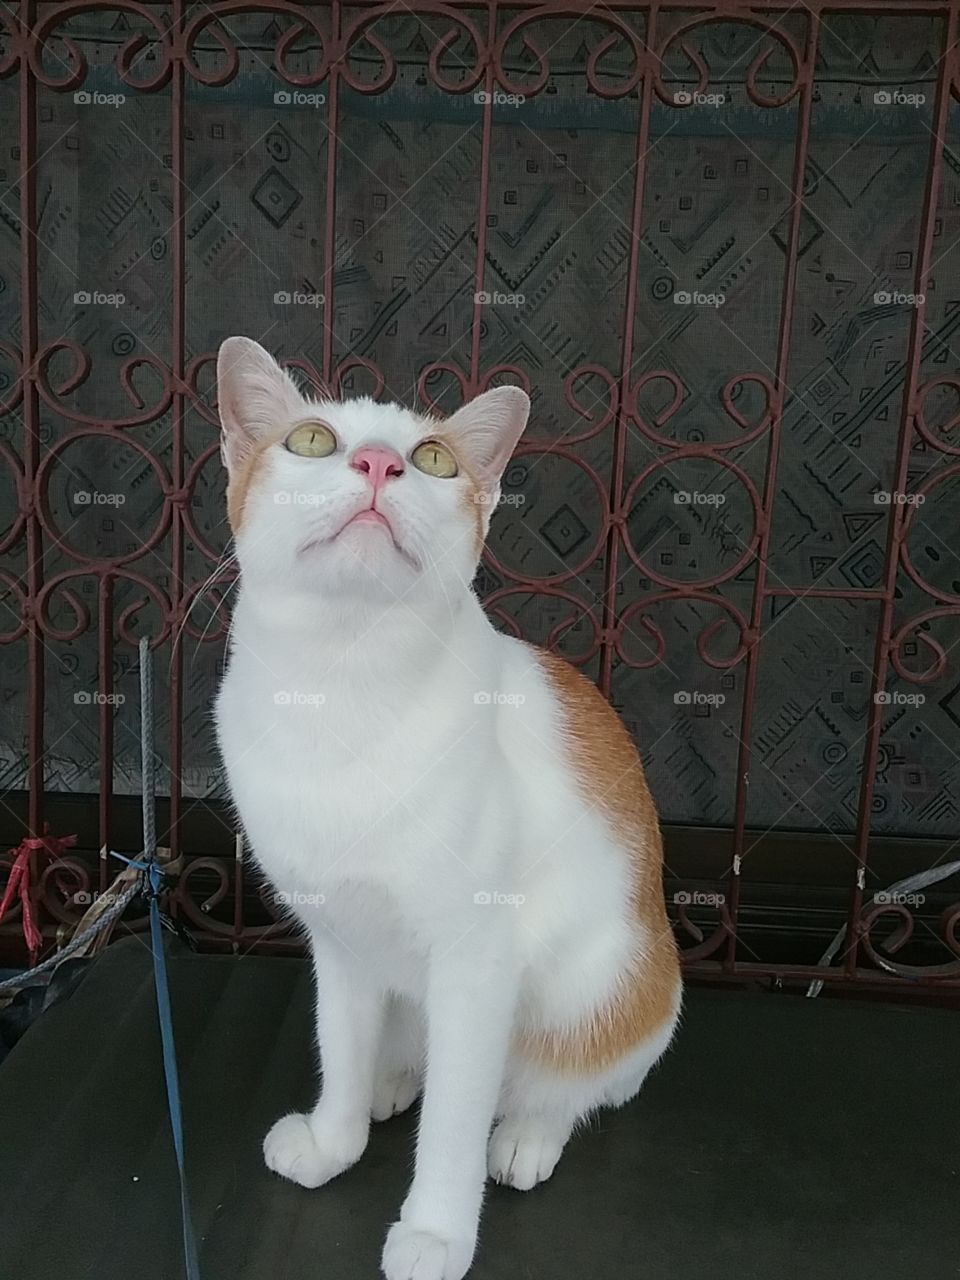 A cute cat is looking up to greet you.